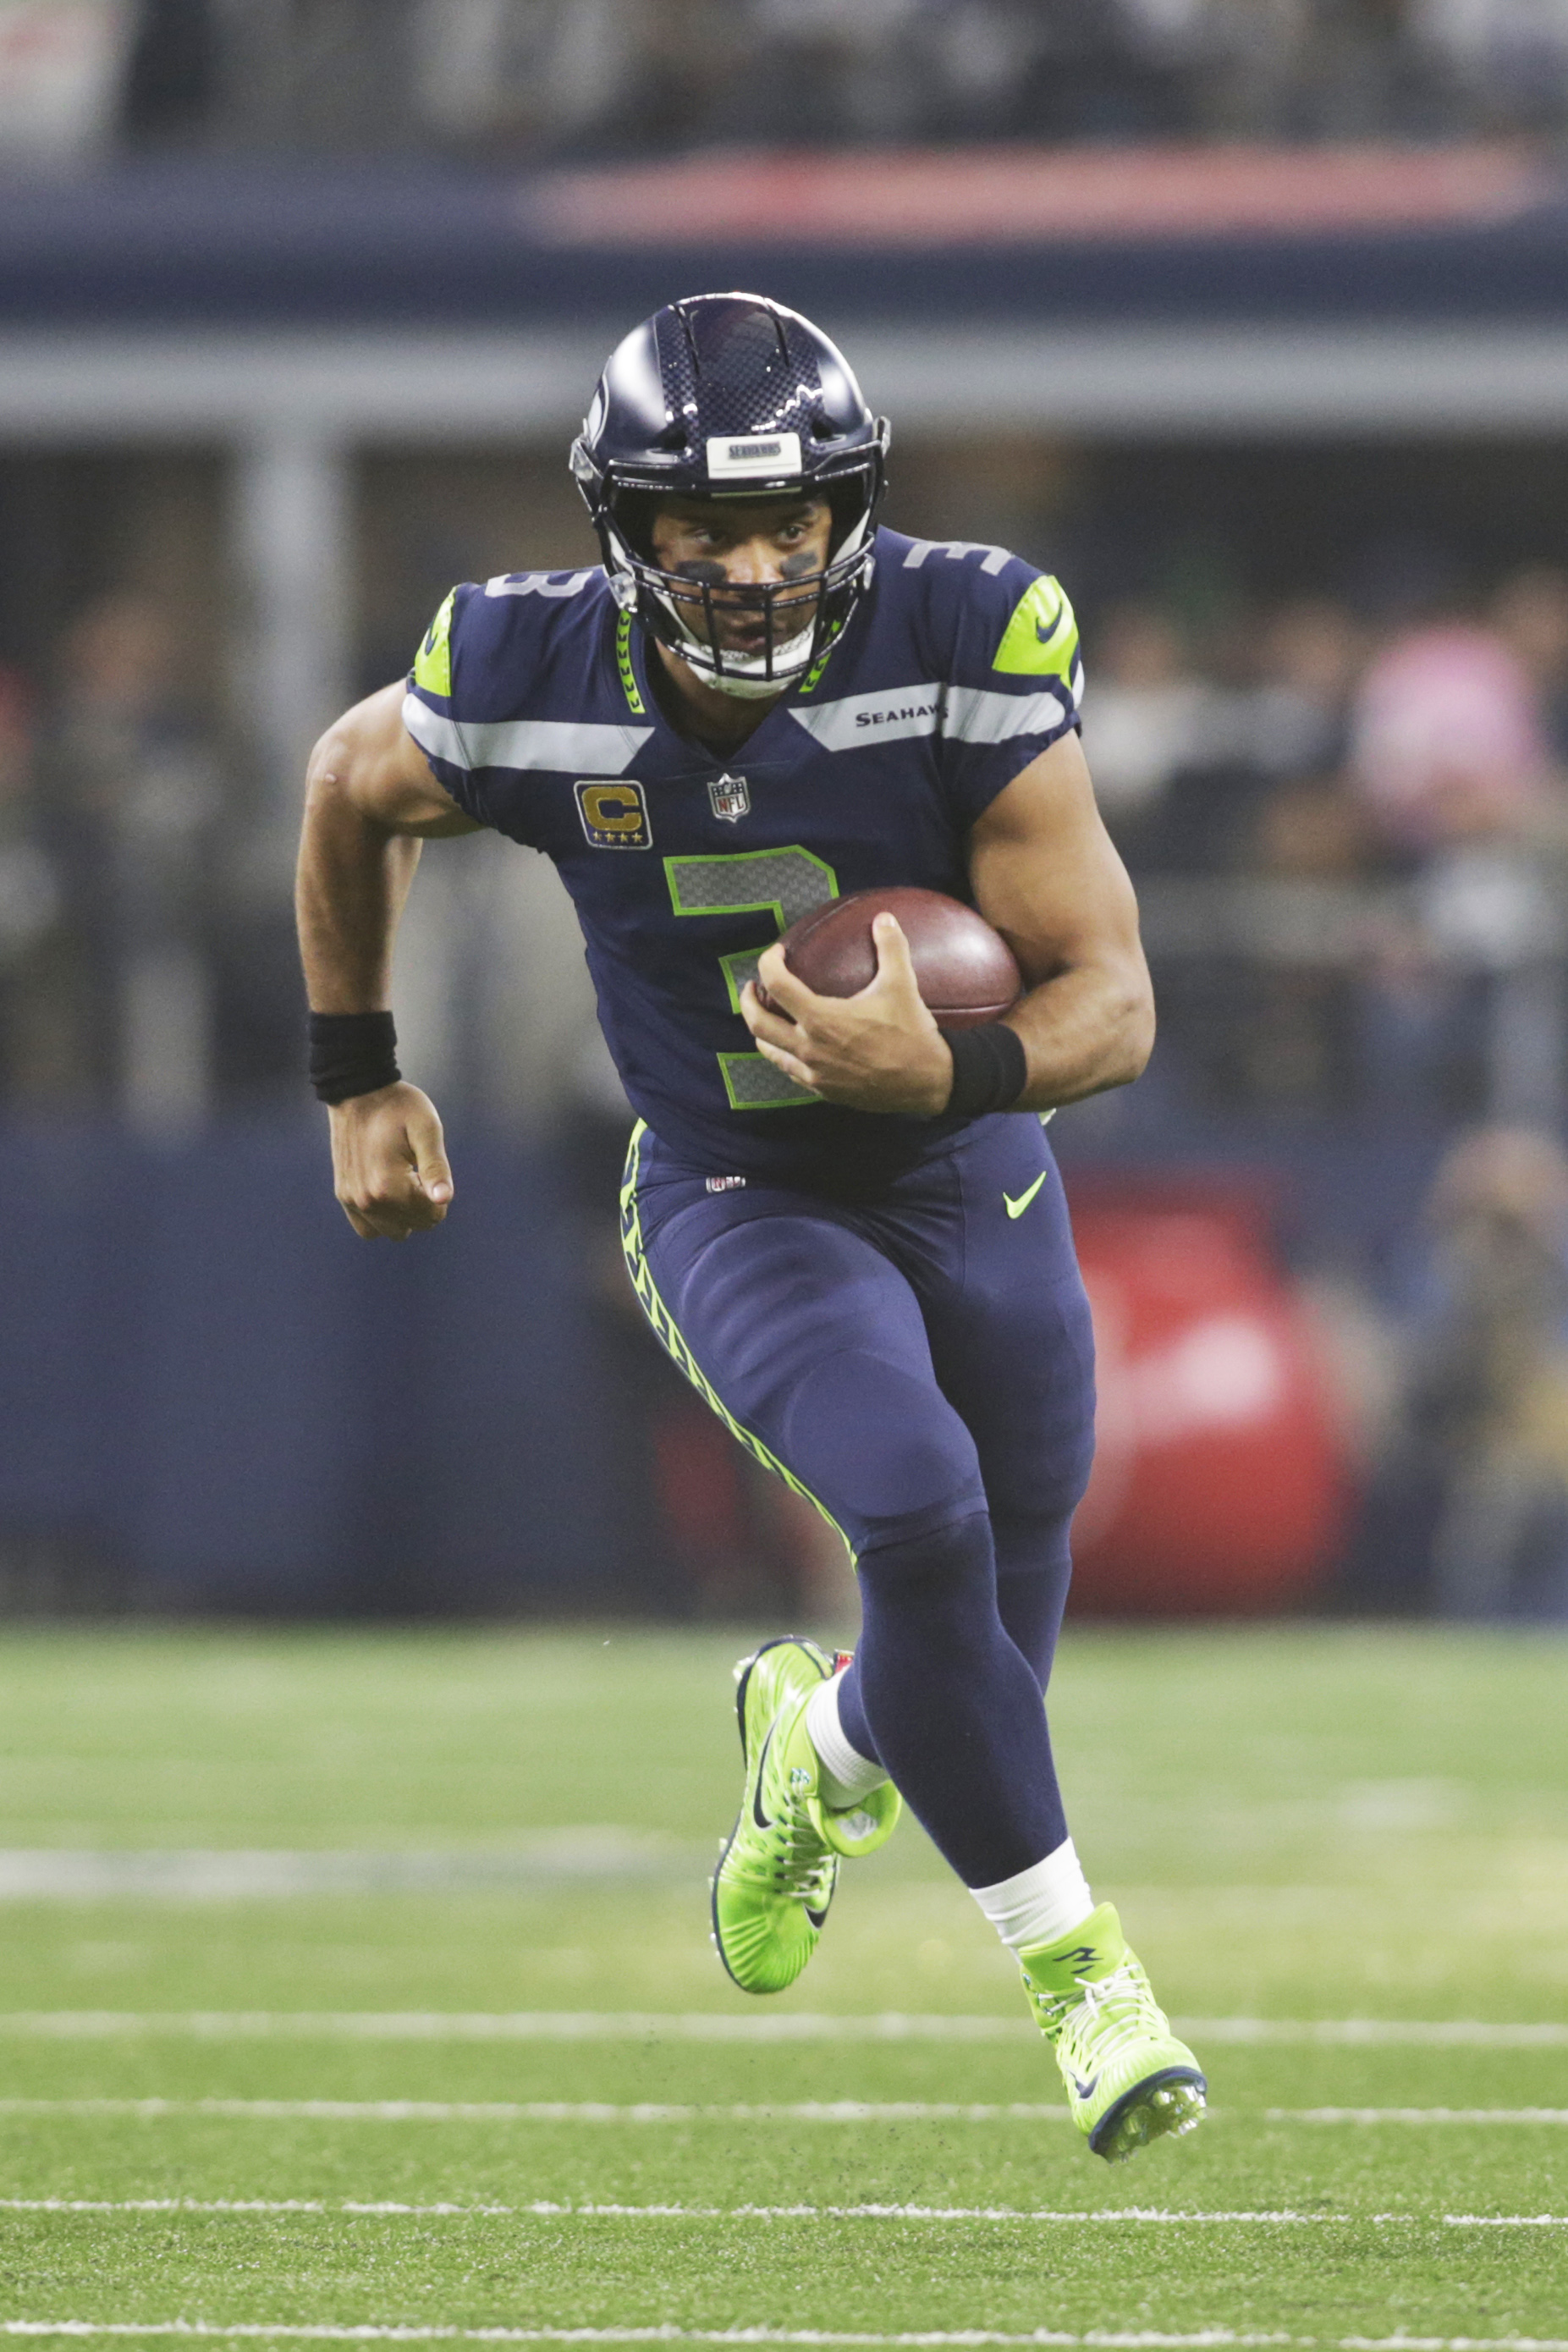 what size jersey does russell wilson wear